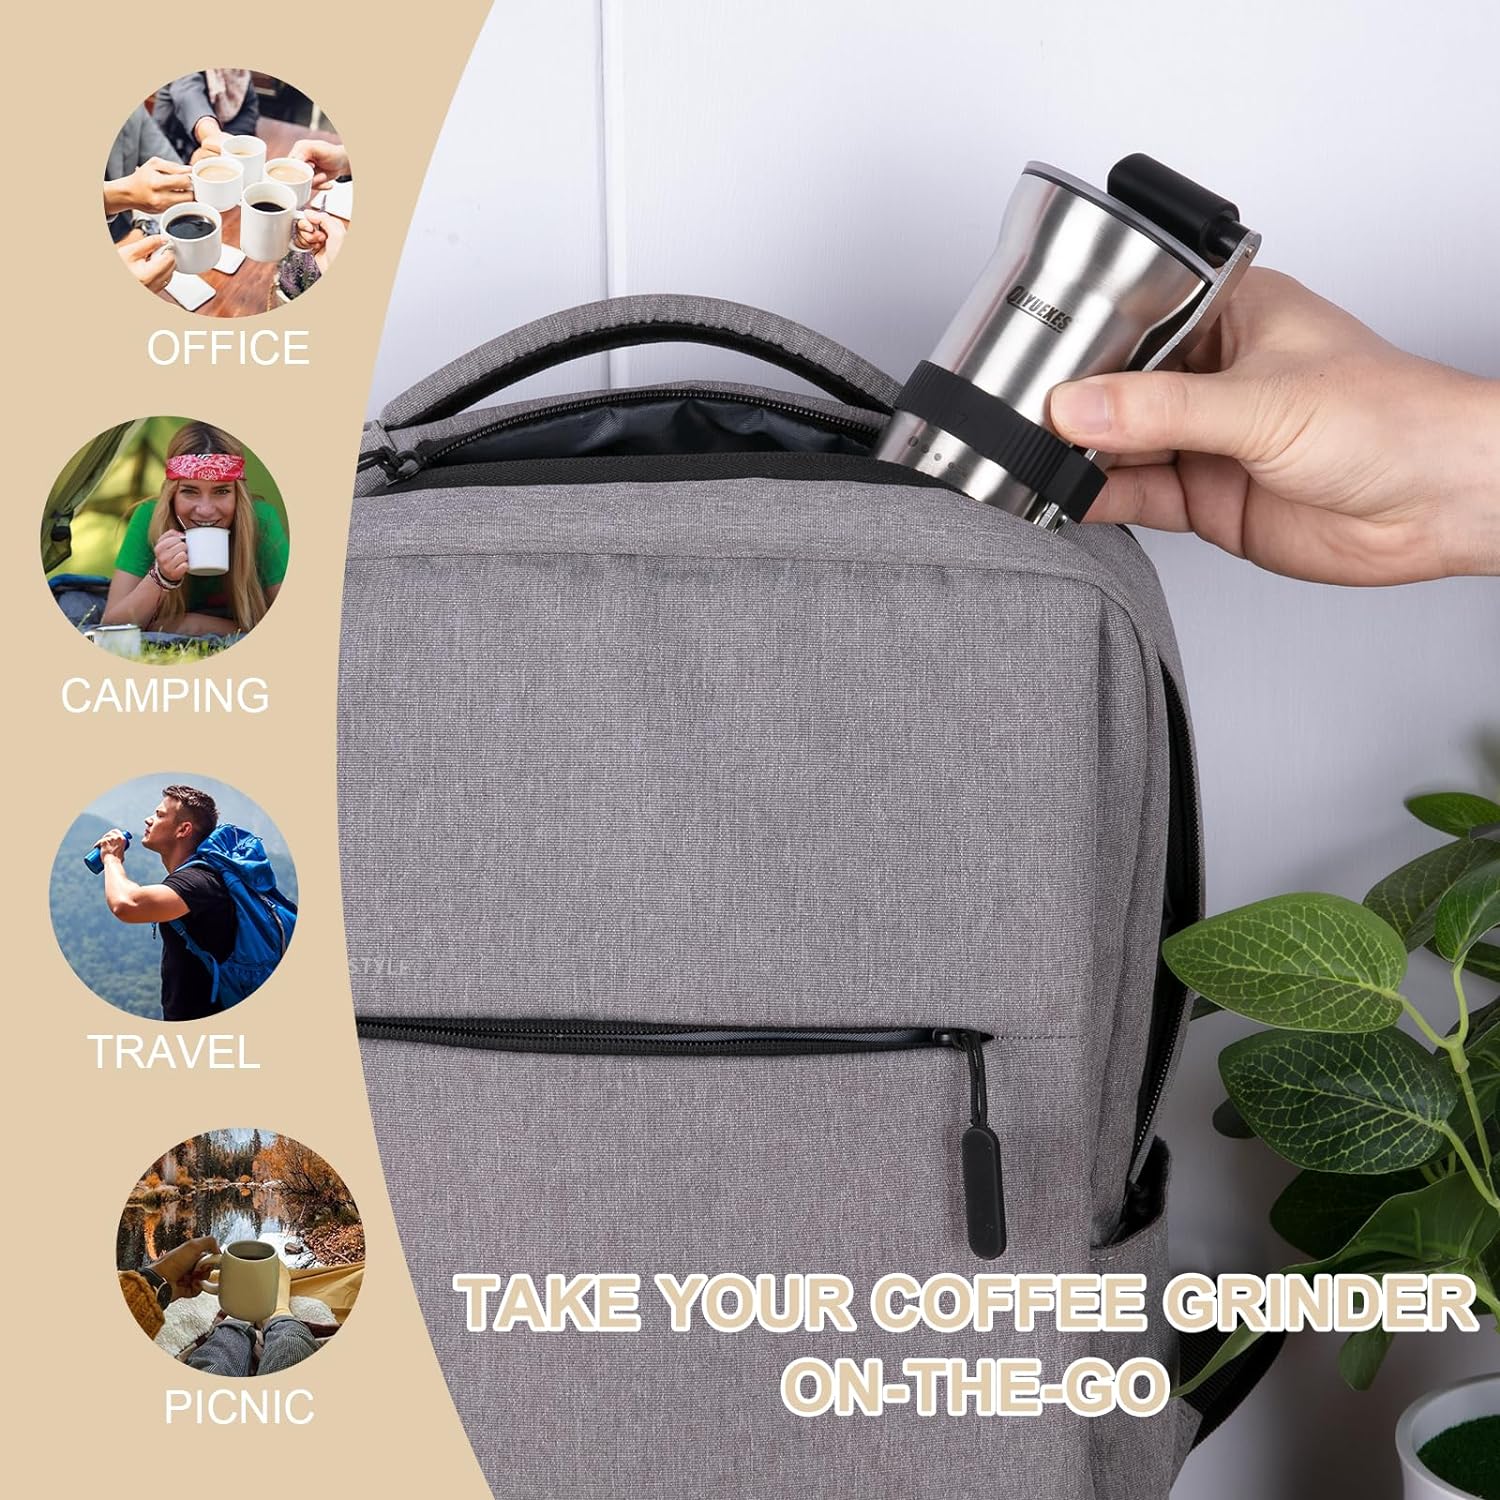 Upgrade Manual Coffee Grinder, Portable Stainless Steel Hand Crank Coffee Bean Grinder, Hand Coffee Grinder 6 Coarseness Settings, burr coffee grinder with Ceramic Burrs, Perfect for families, camping